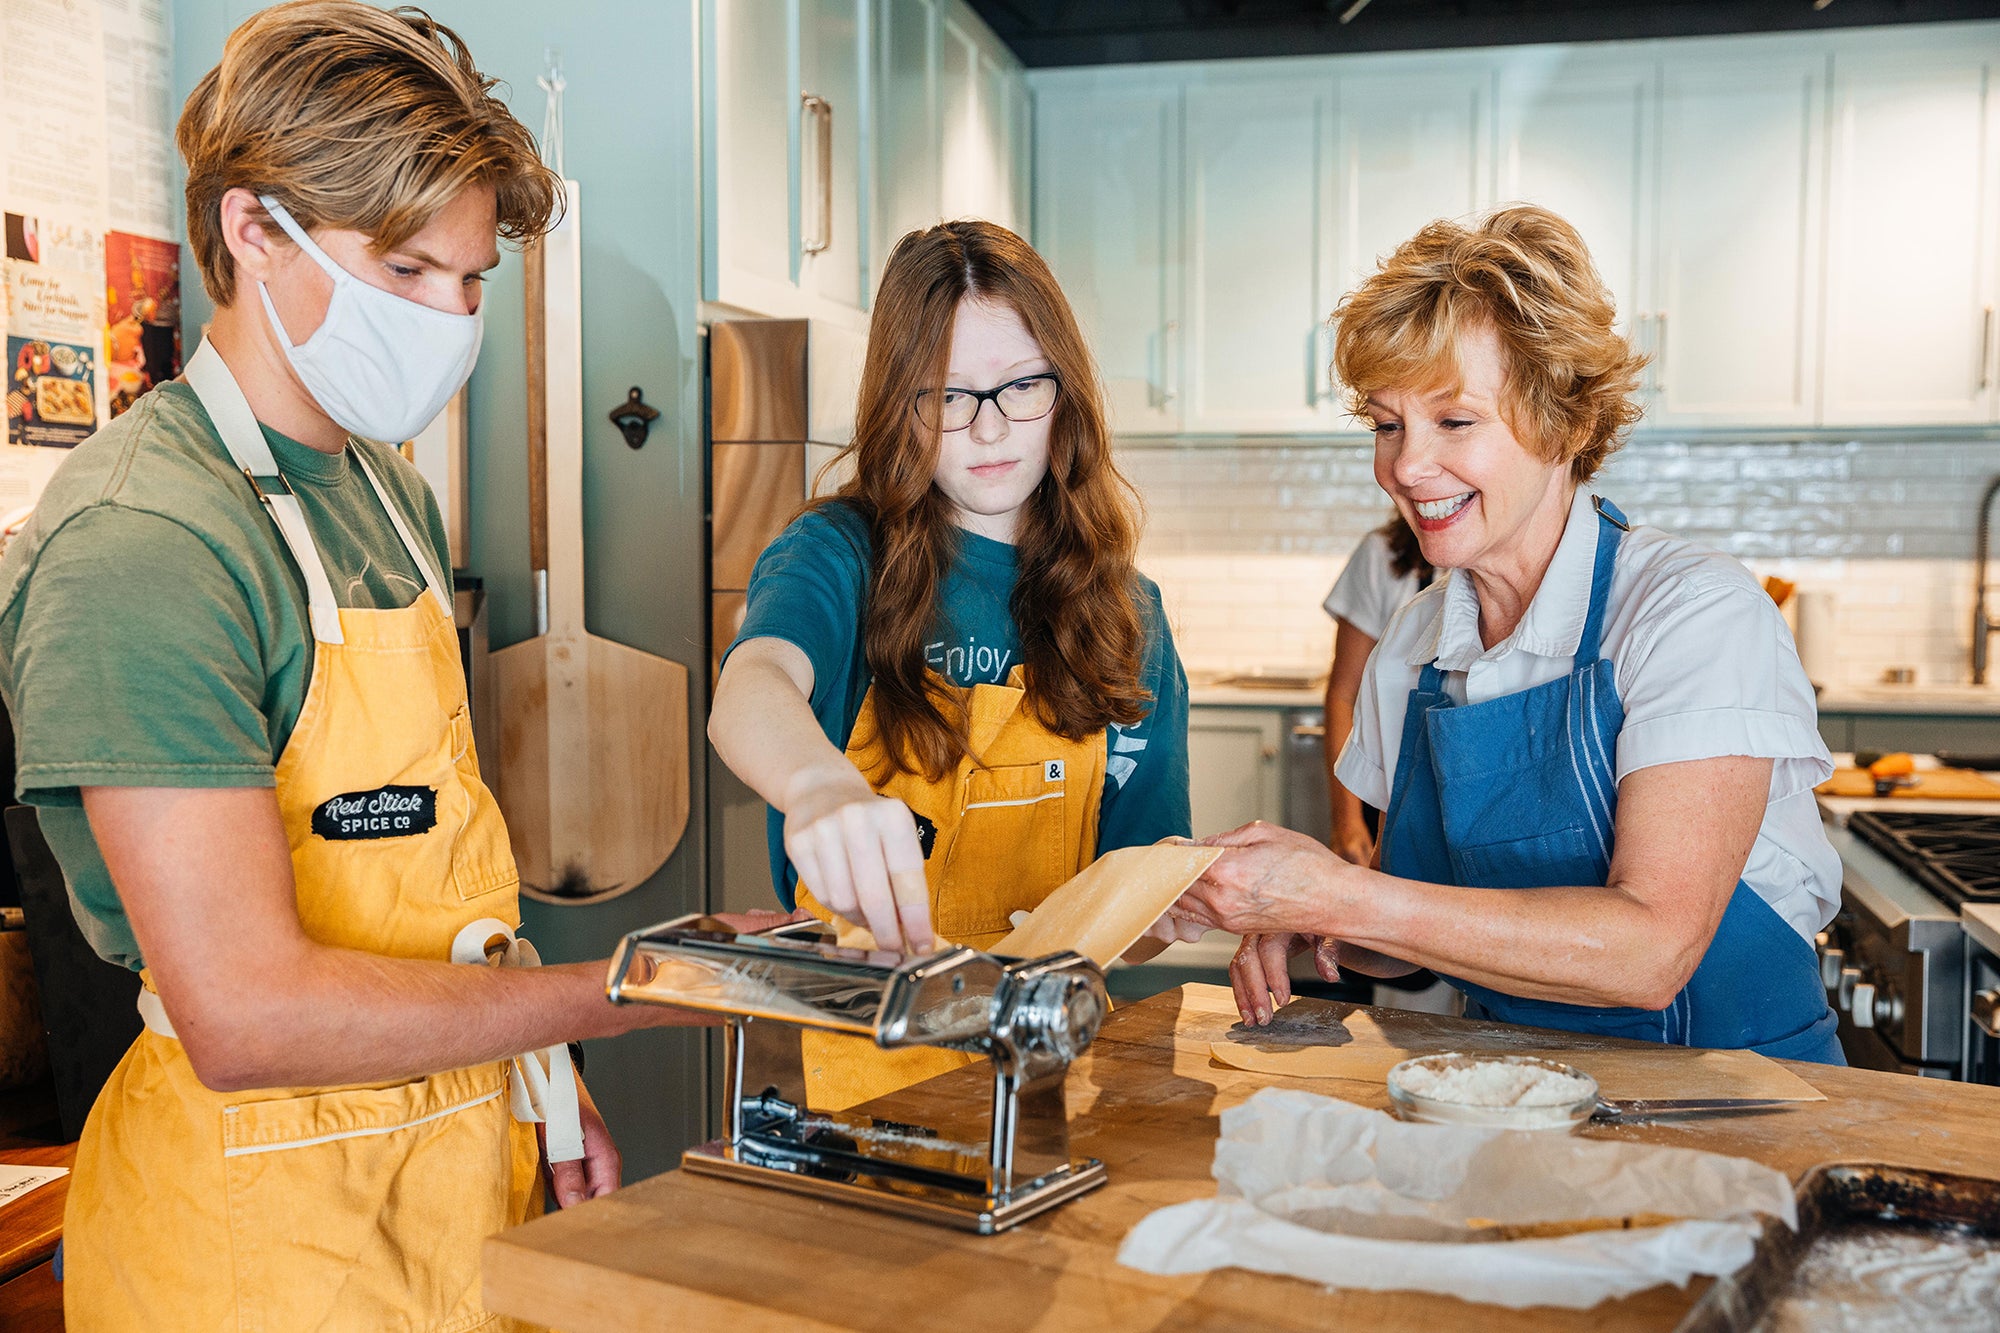 Teens in the Kitchen: 06.23.21